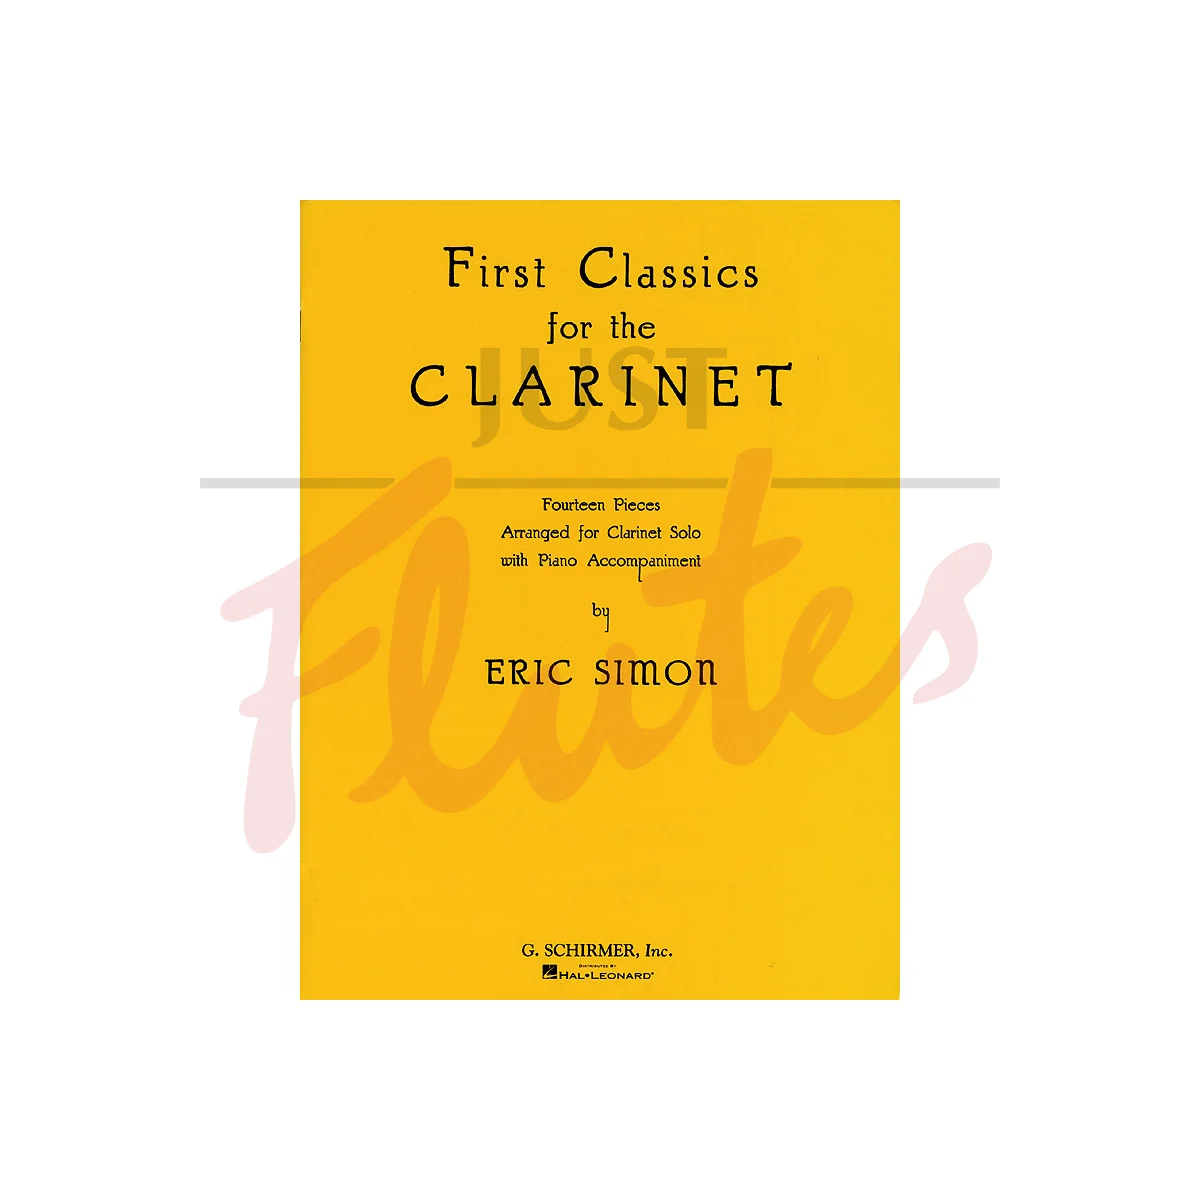 First Classics for the Clarinet